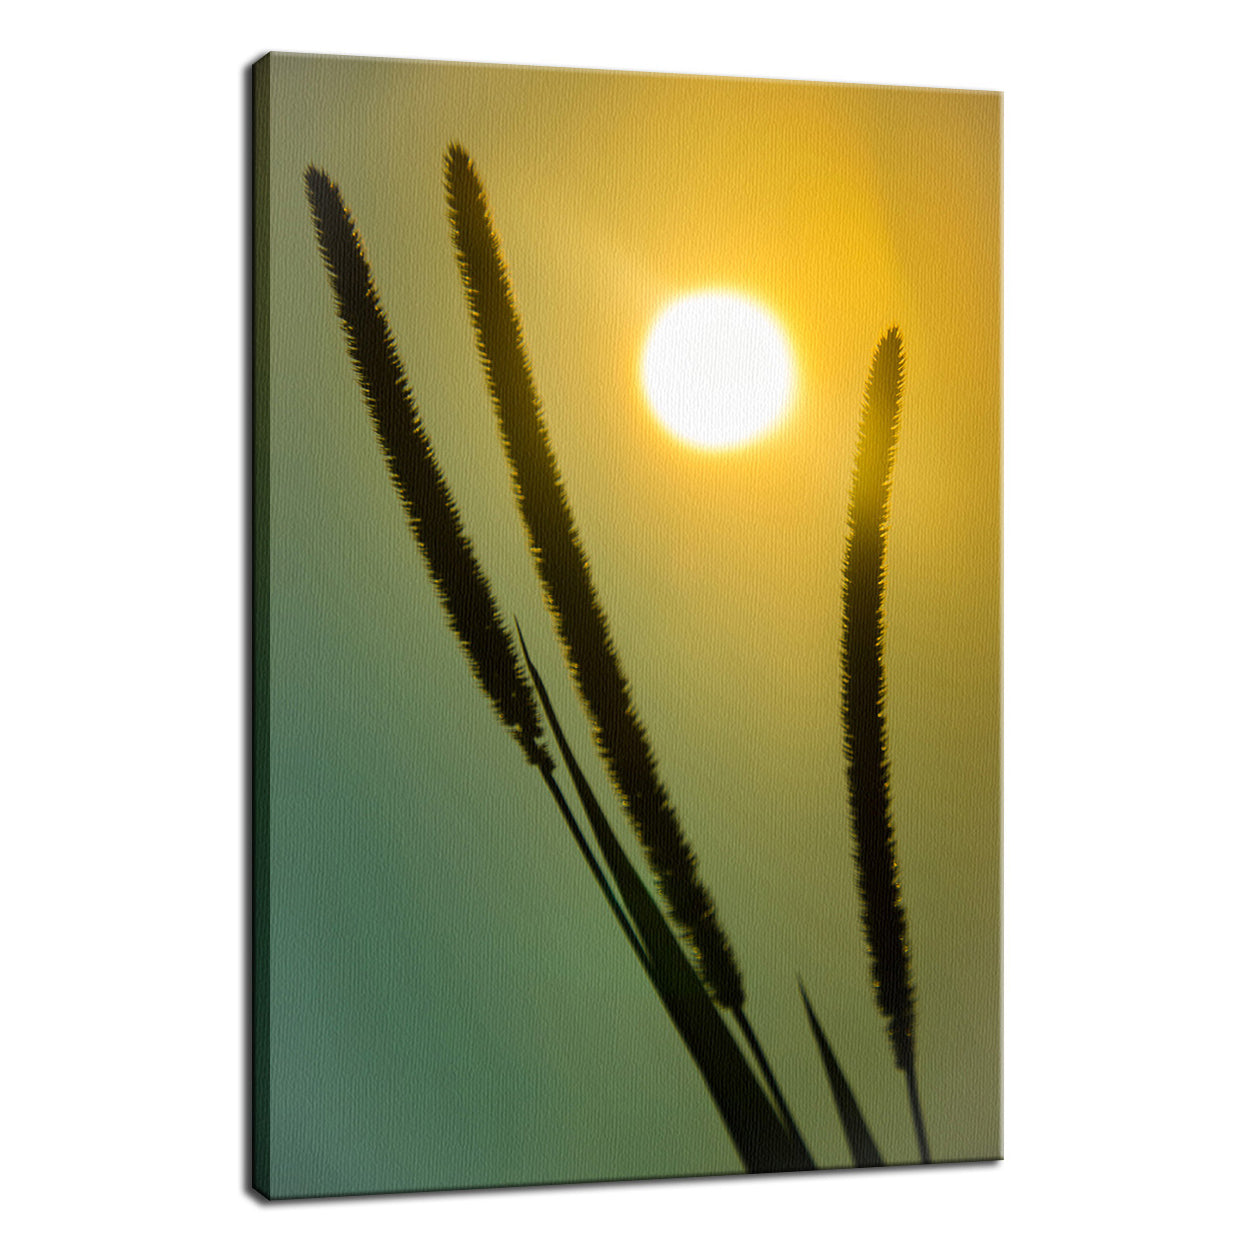 Silhouettes in Sunset Botanical / Nature Photo Fine Art Canvas Wall Art Prints  - PIPAFINEART